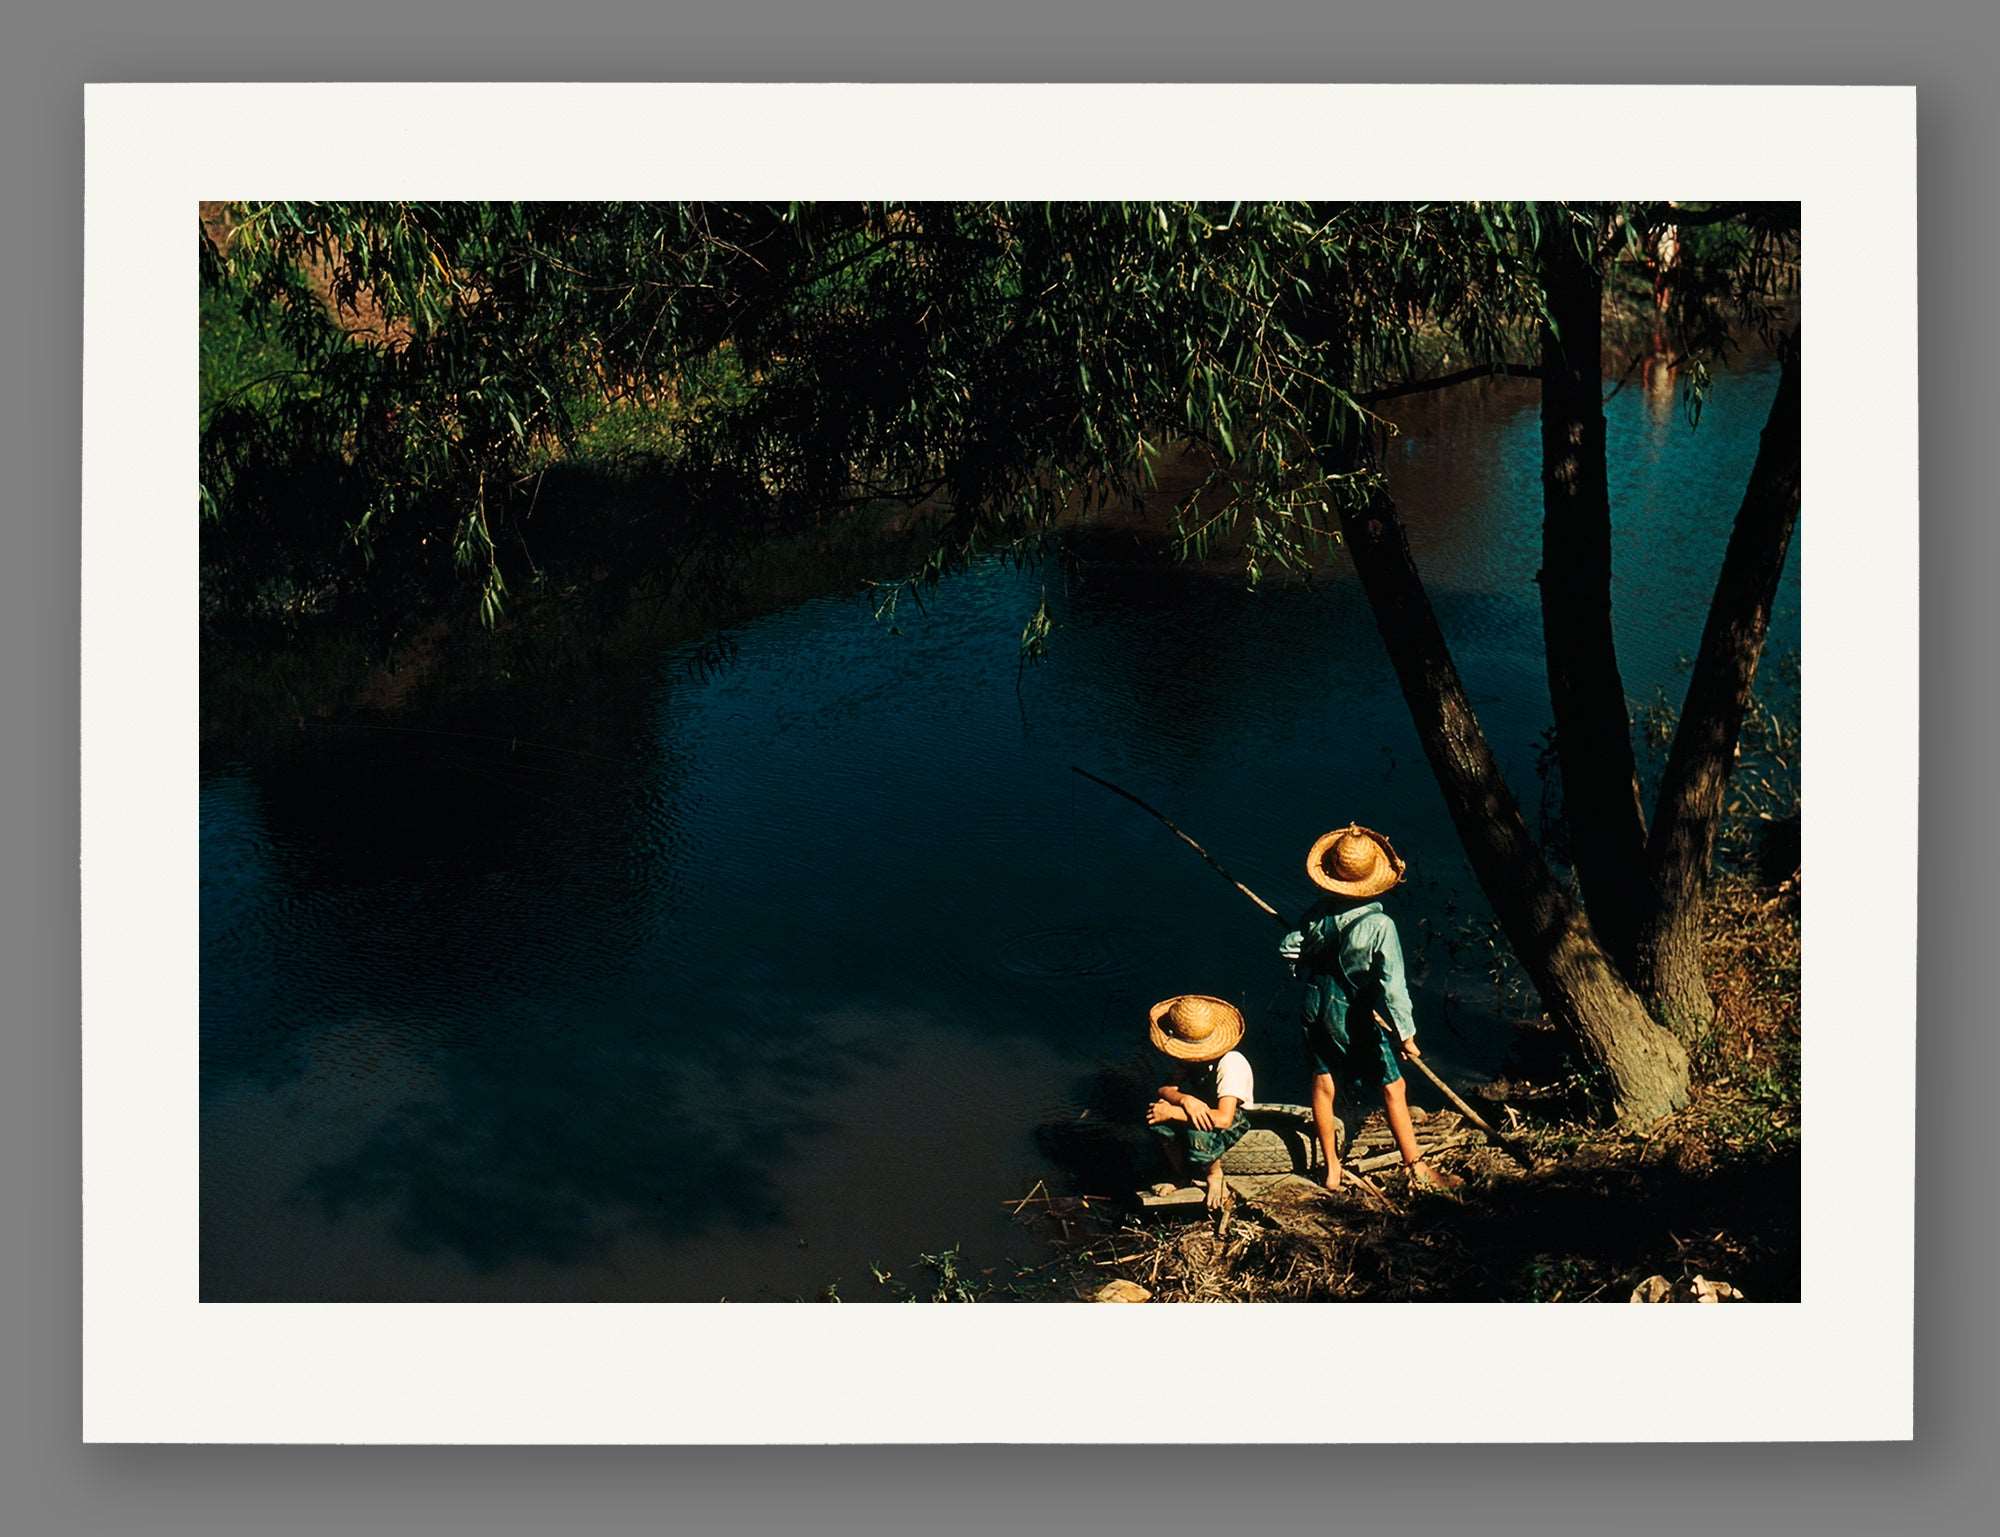 A fine art paper print of a vintage photograph of two boys fishing in a Bayou